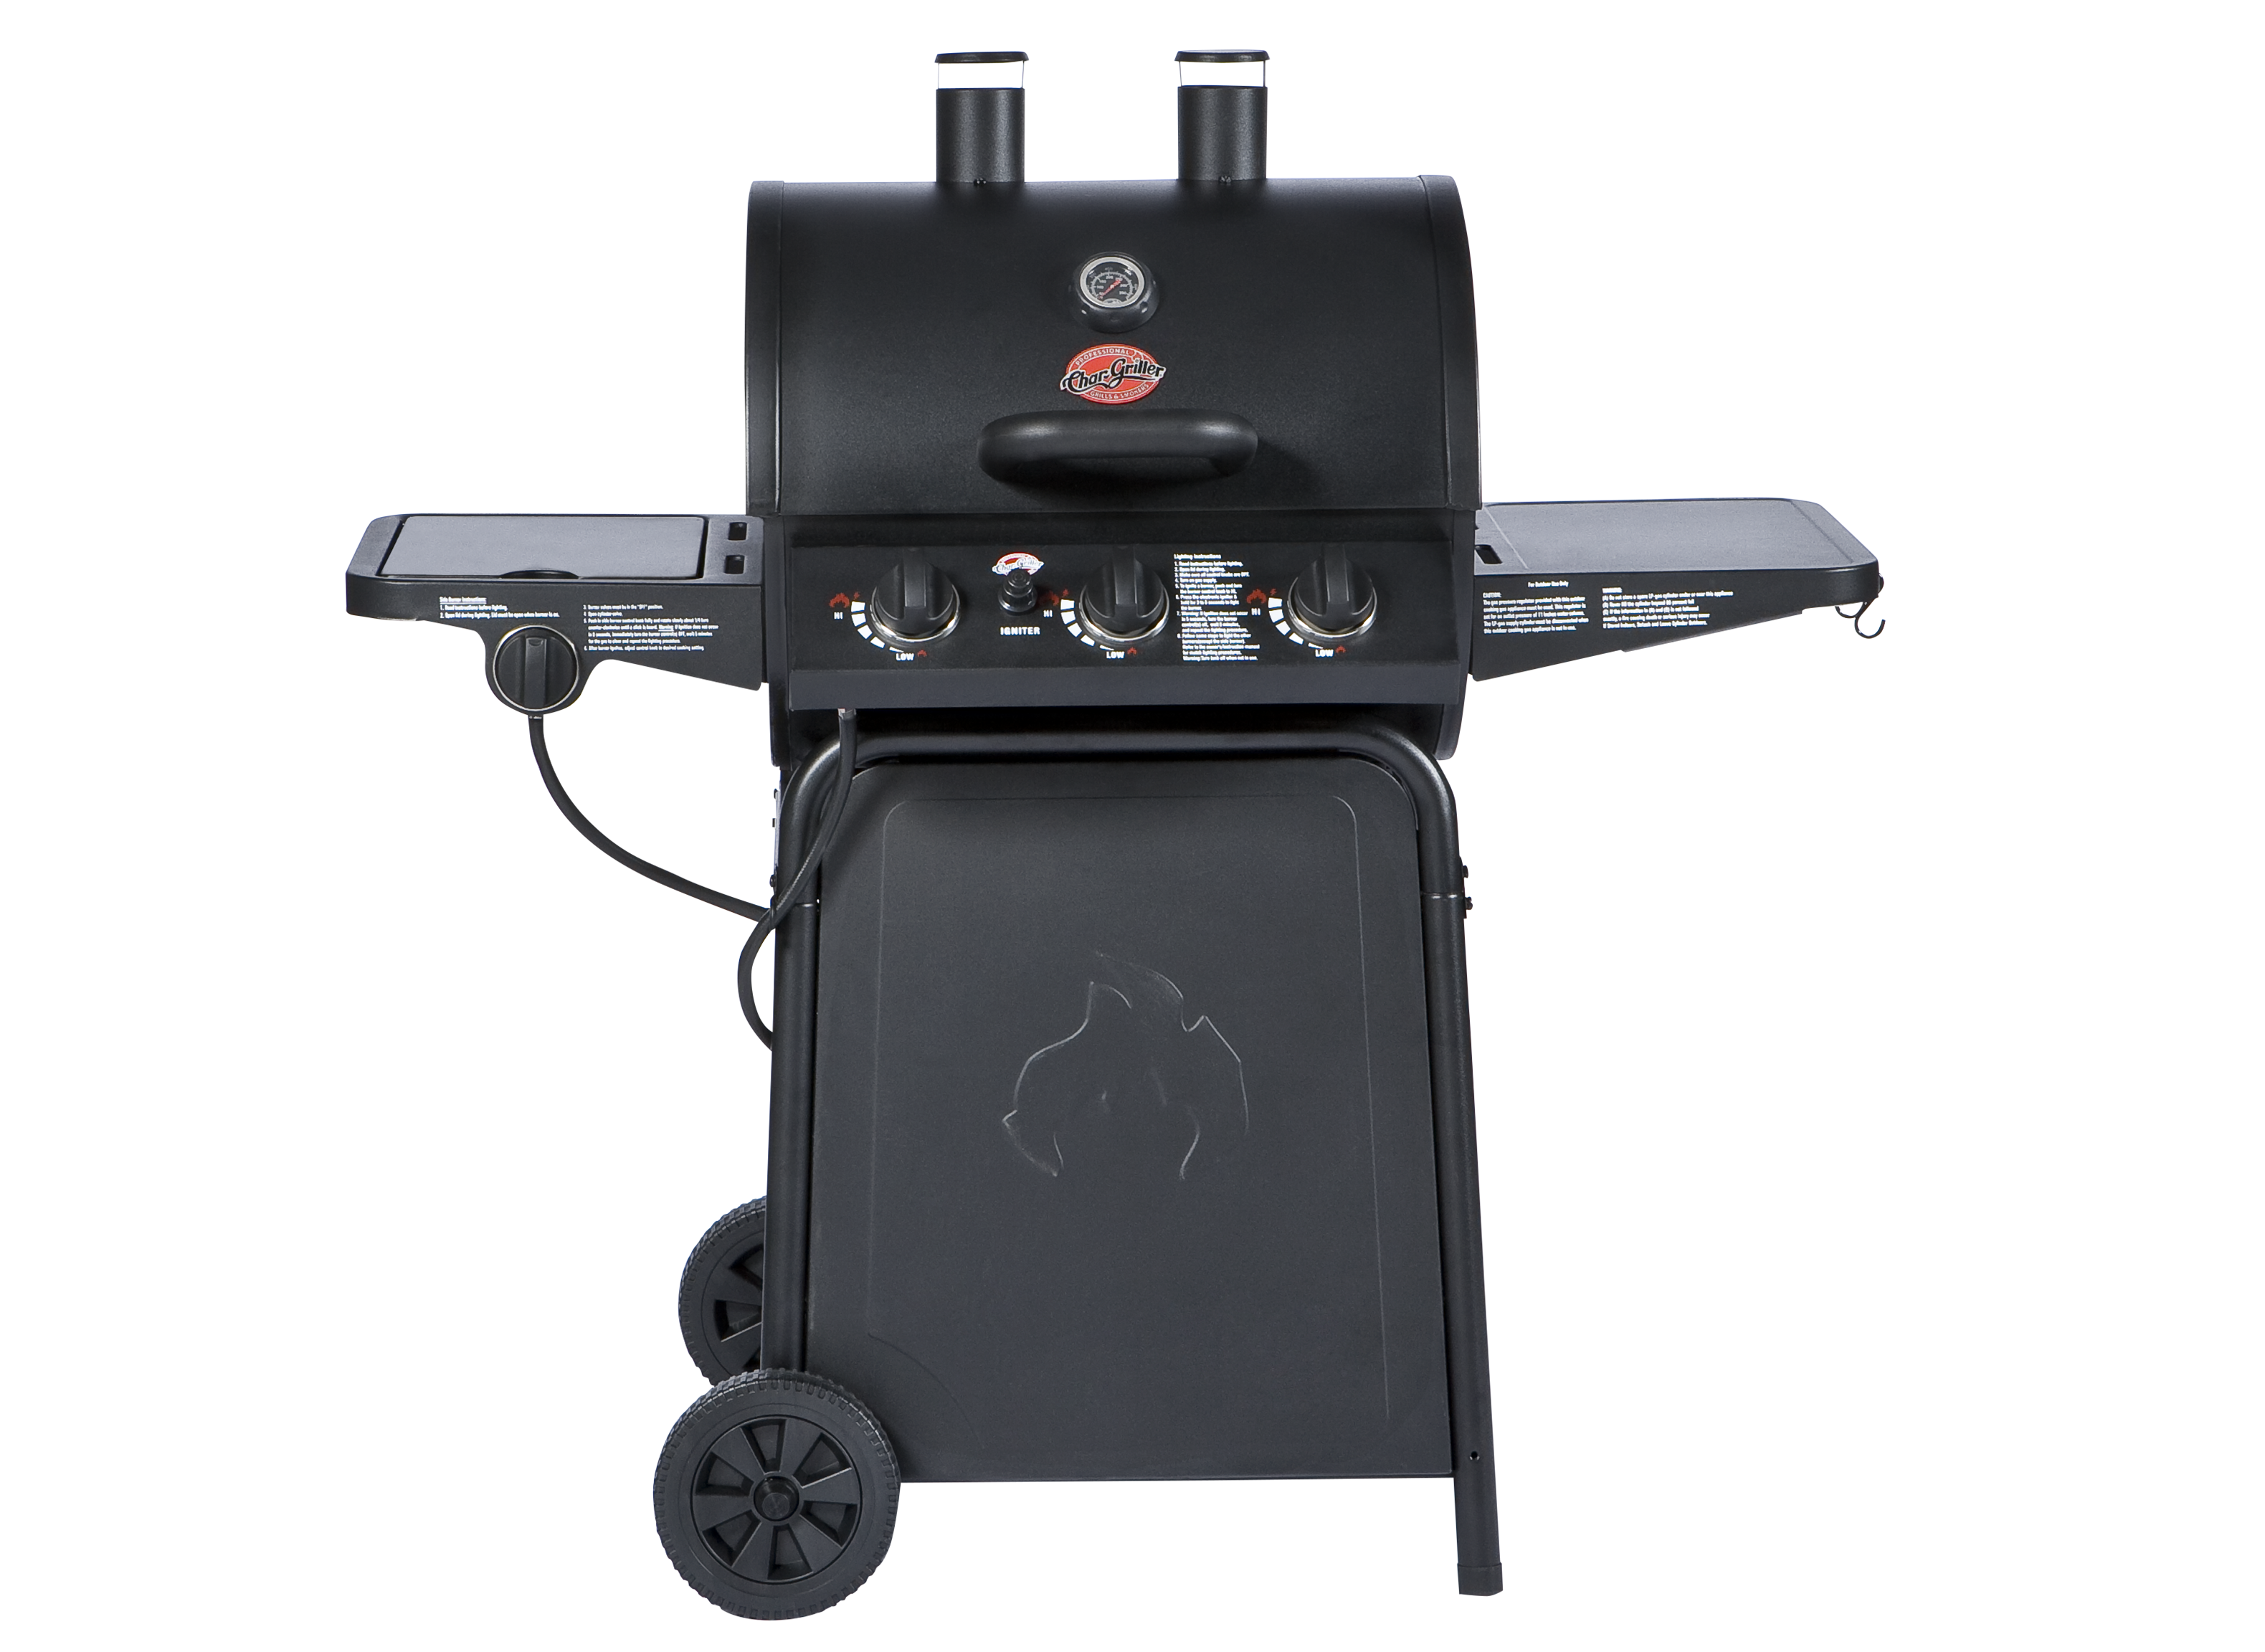 Char-Griller Pro 3001 Grill Review - Consumer